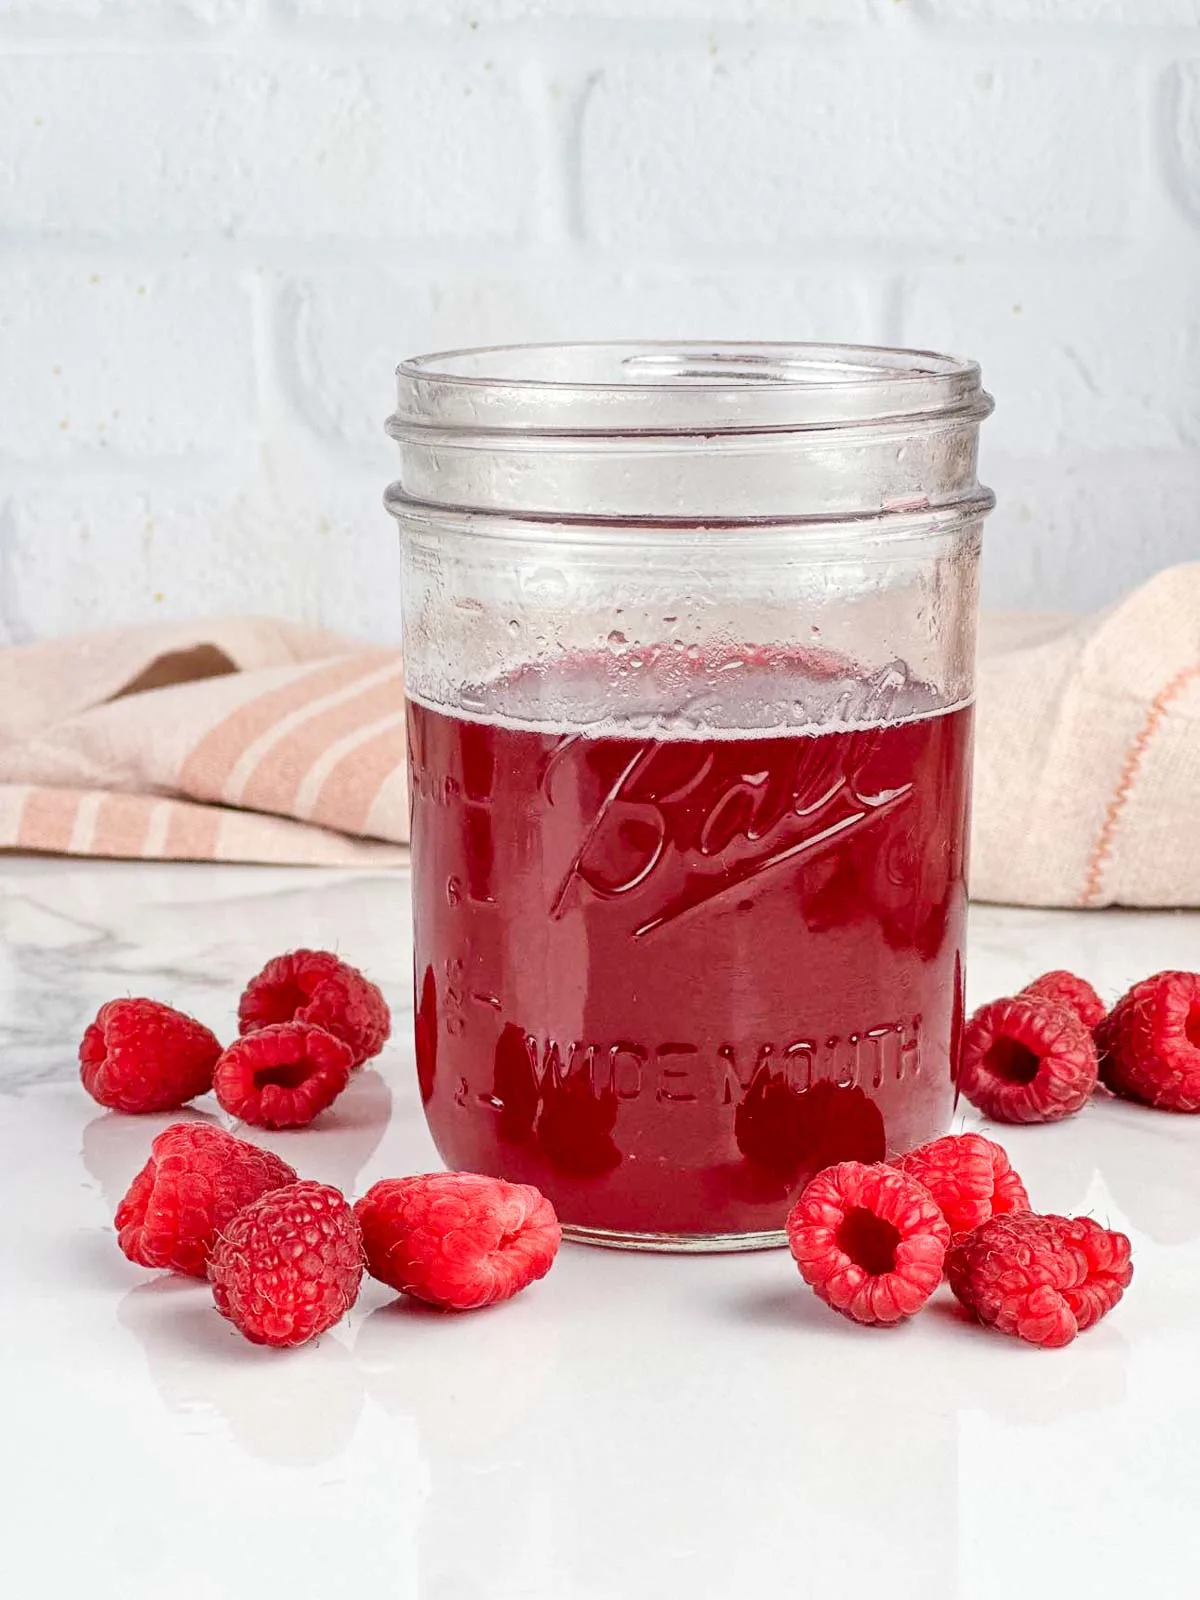 Raspberry simple syrup for drinks is an easy 3 ingredient recipe that will have you making flavored cocktails and coffee shop style coffee right at home. Simple and so delicious!